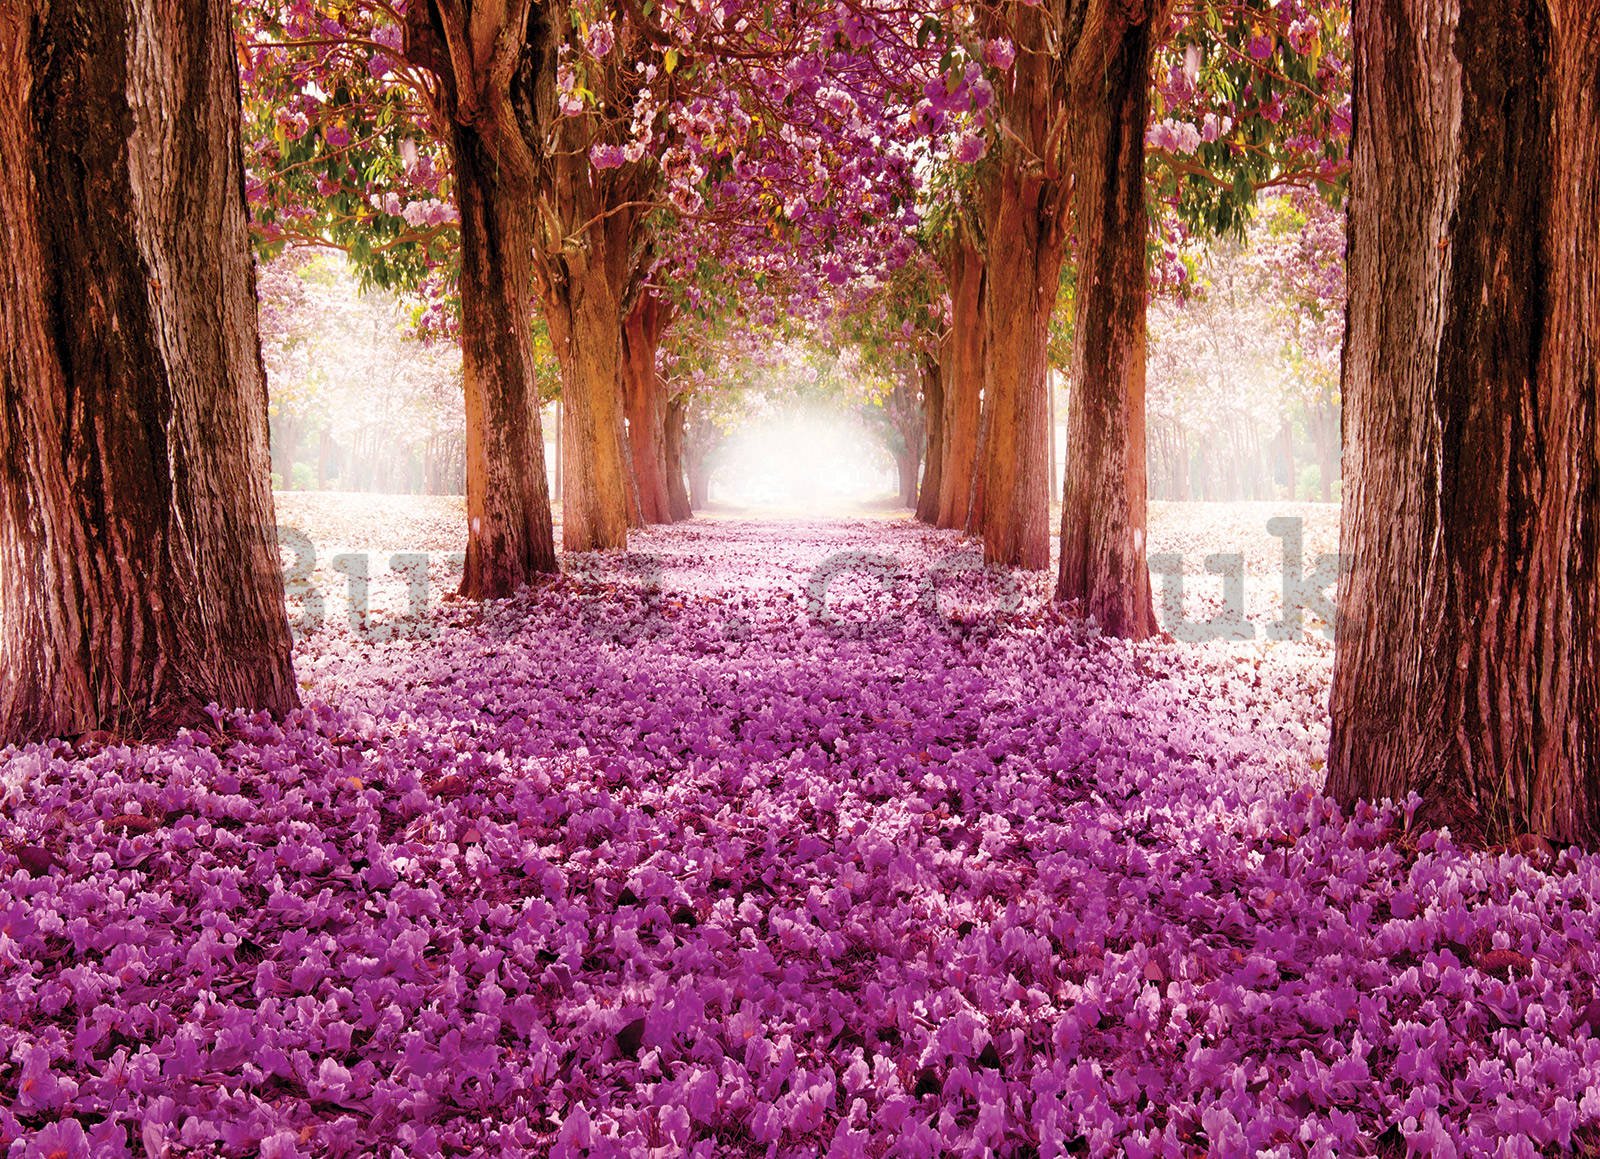 Wall mural: Blossoming Alley - 254x184cm